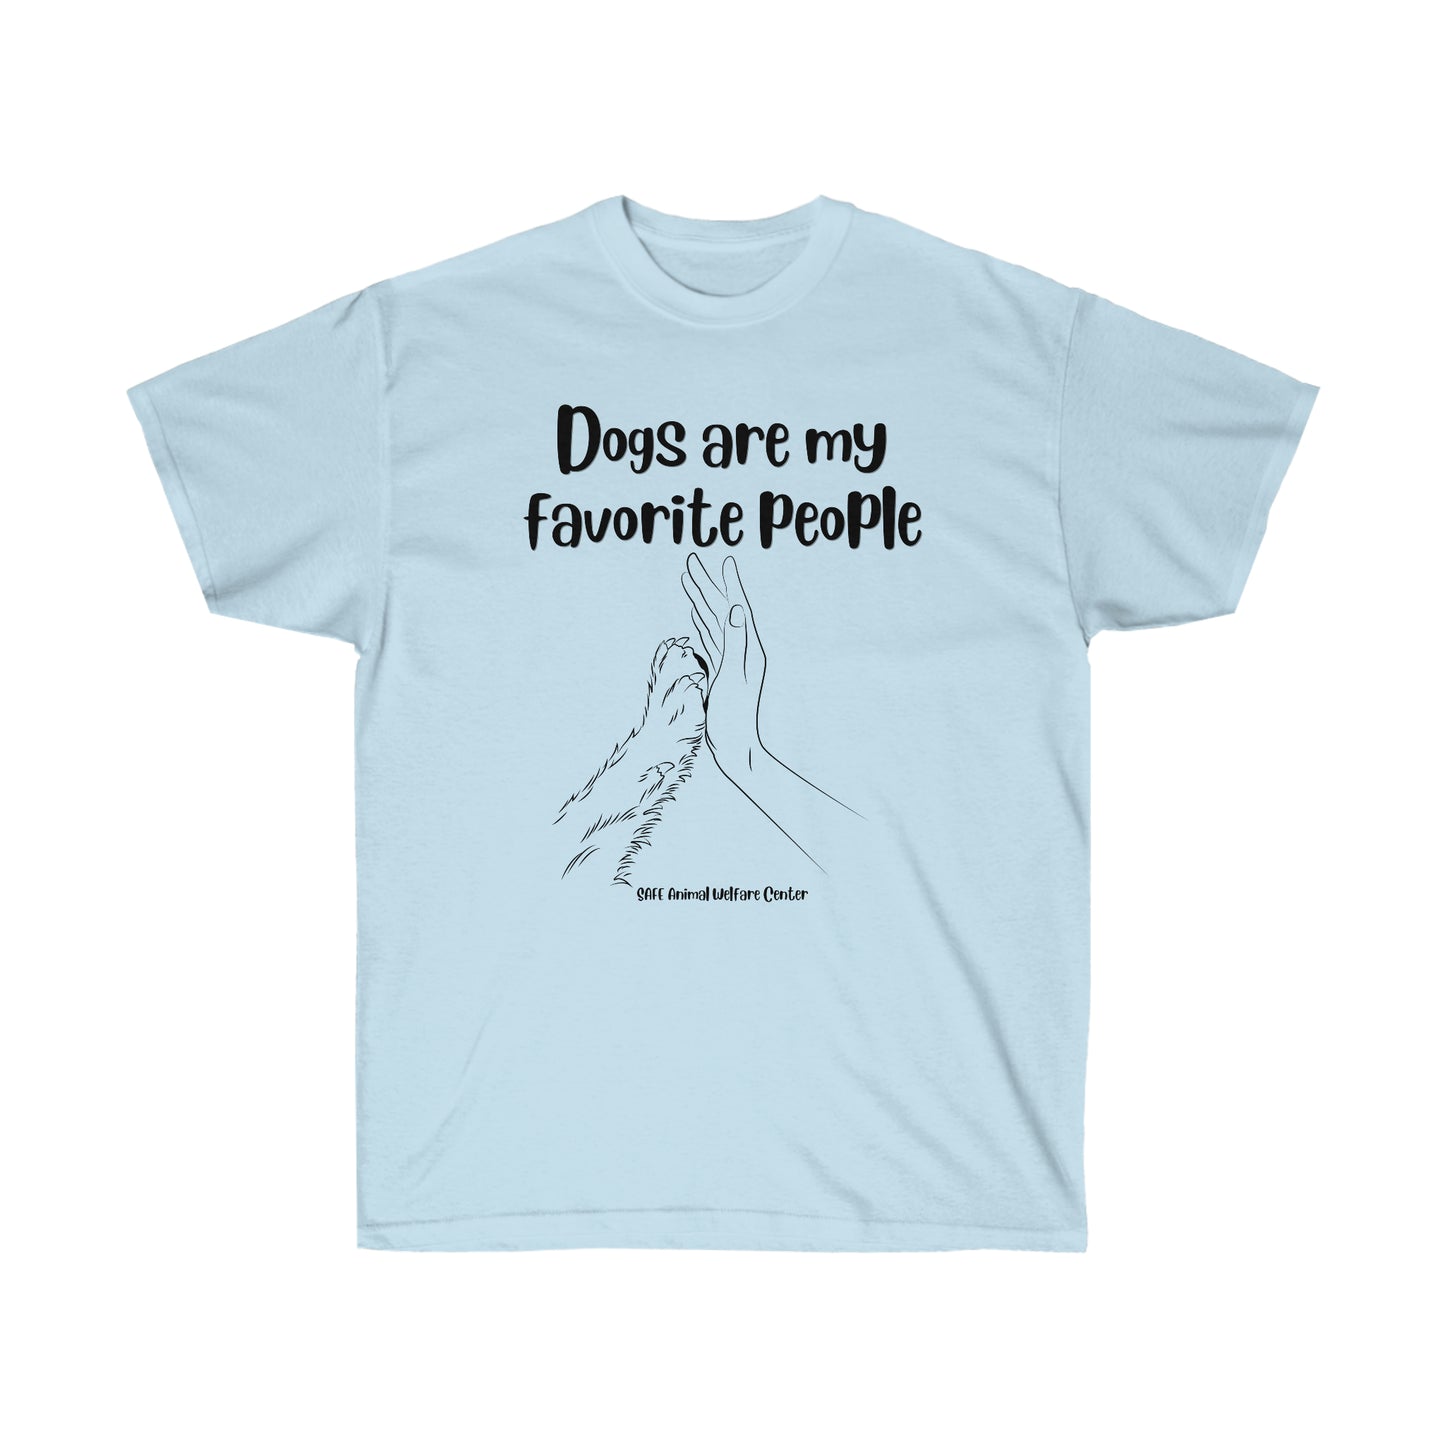 Dogs are my favorite people Unisex Ultra Cotton Tee